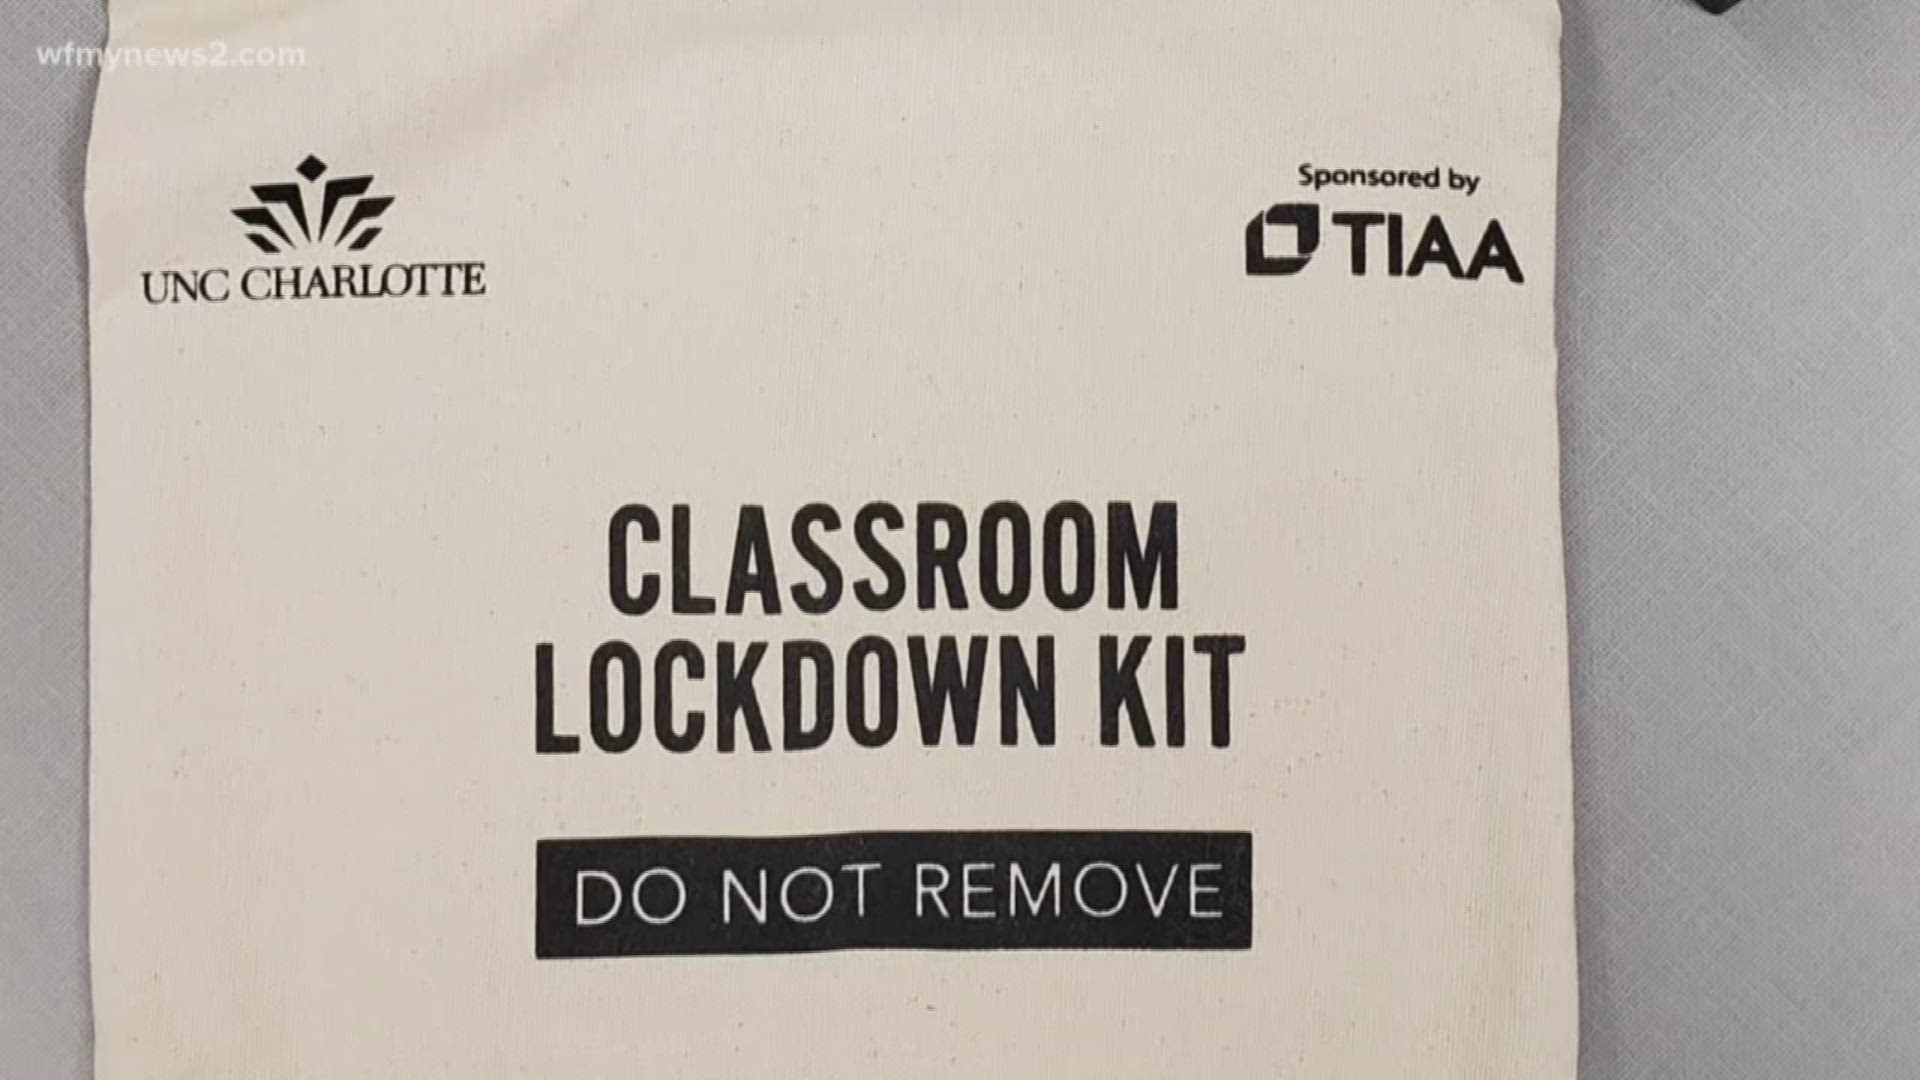 There are only two items in this kit, but they could save a student’s life.